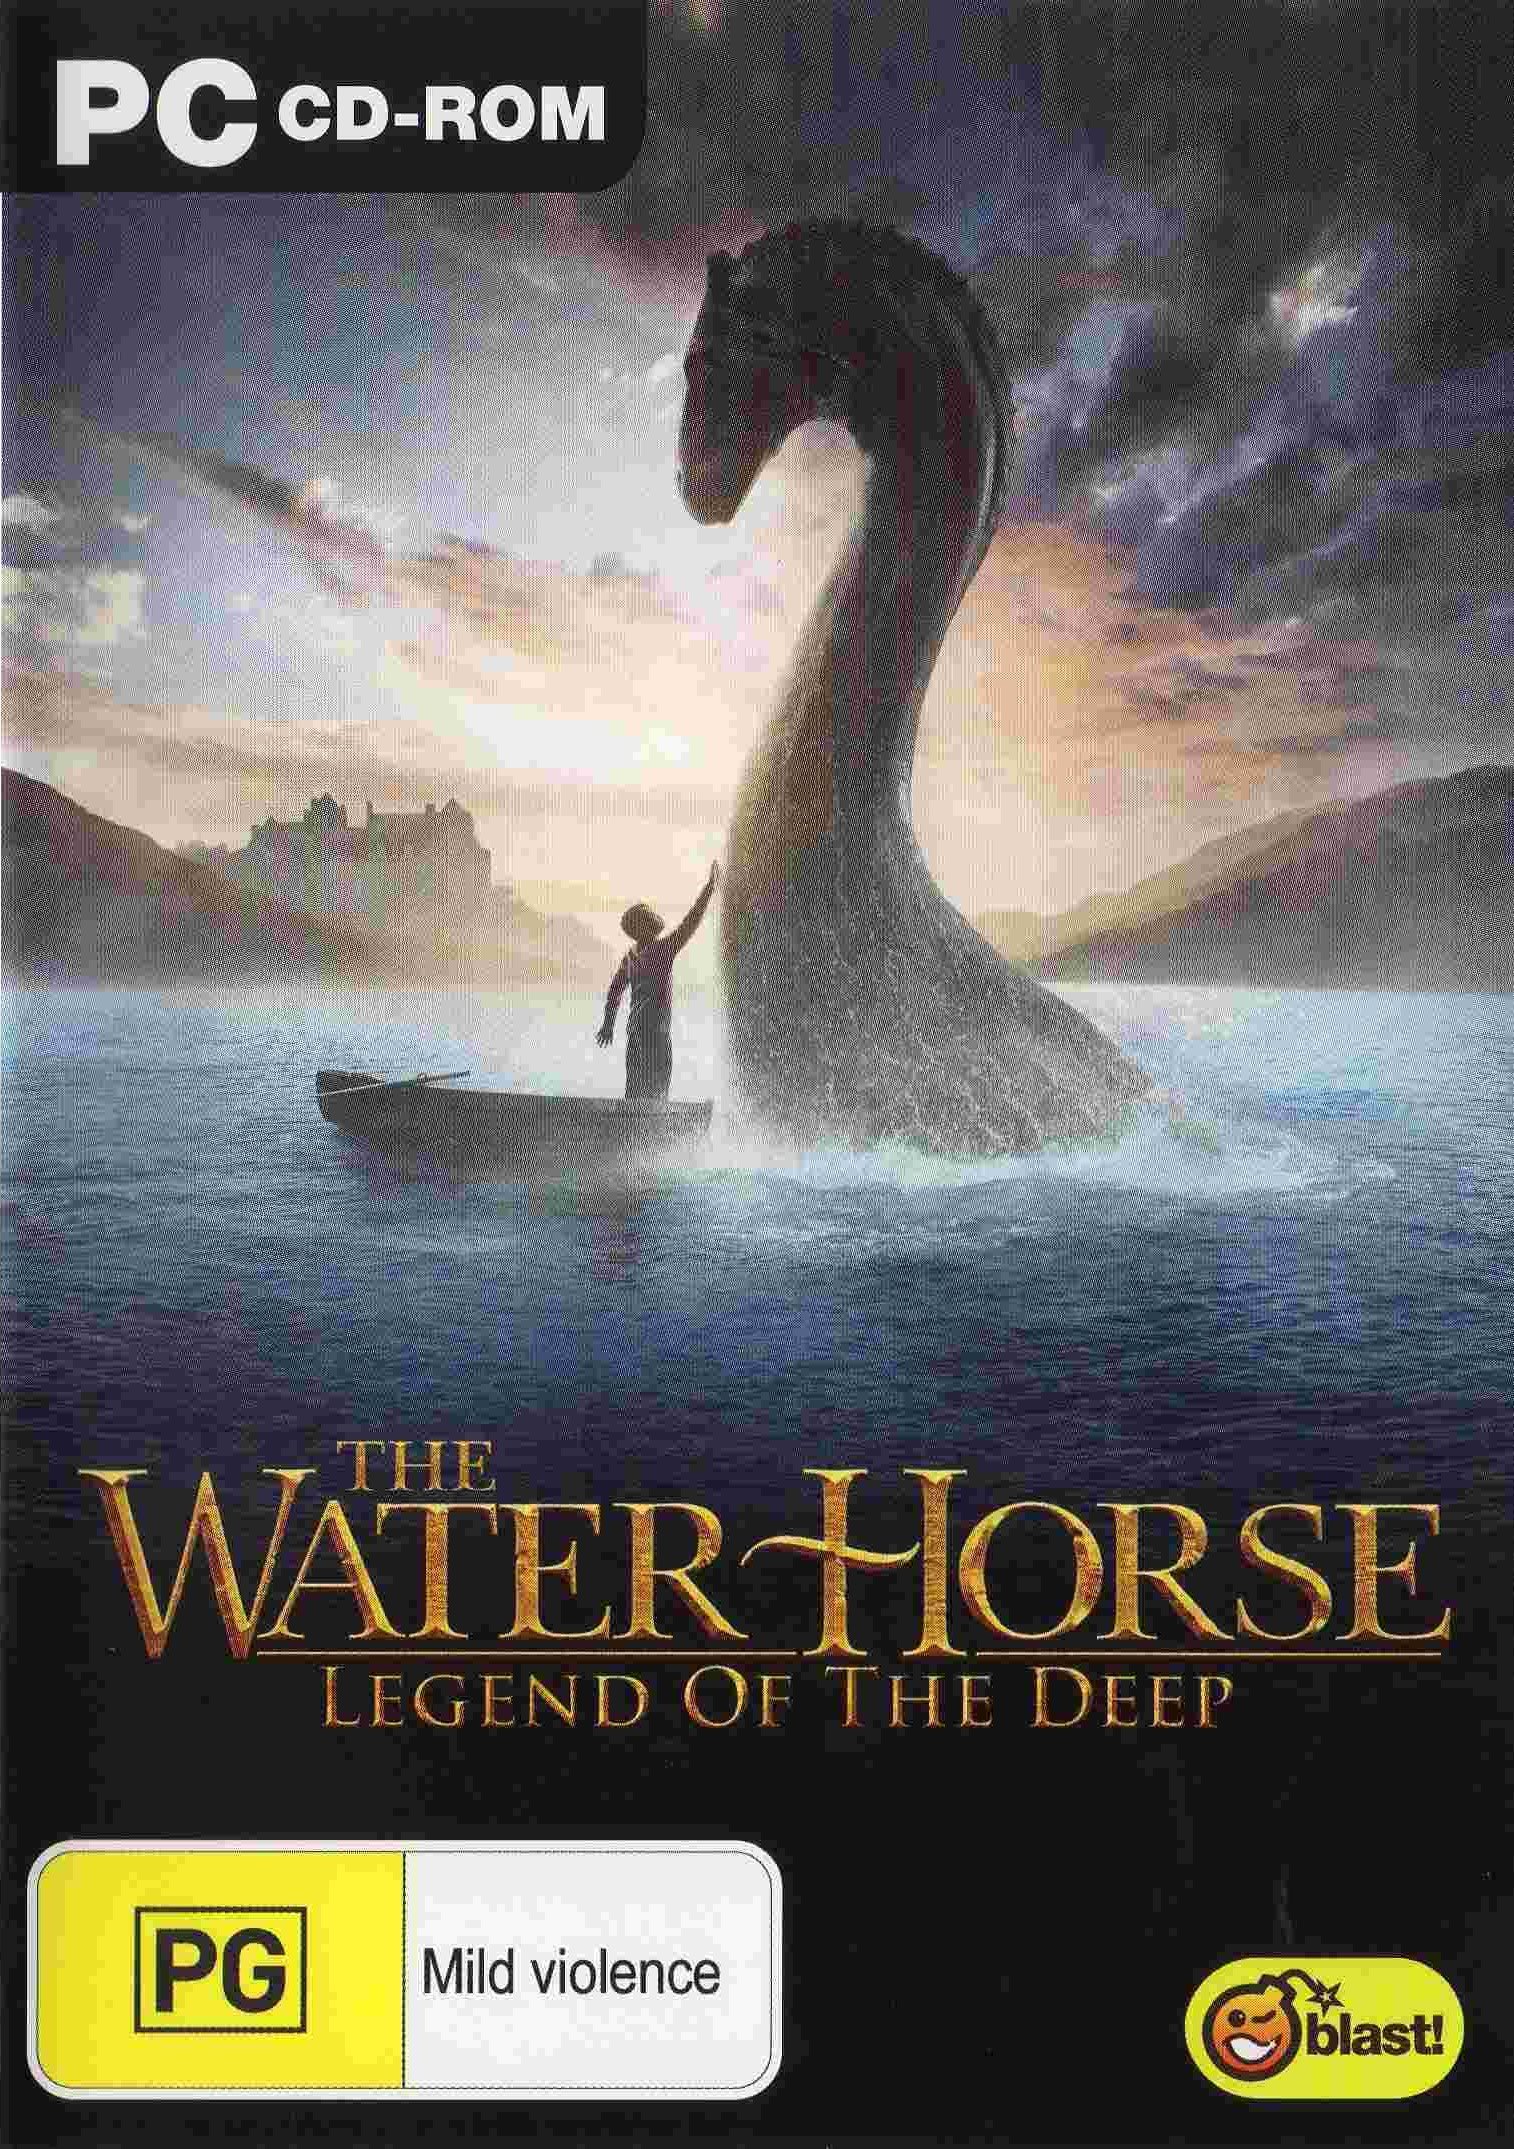 Image of The Water Horse: Legend of the Deep